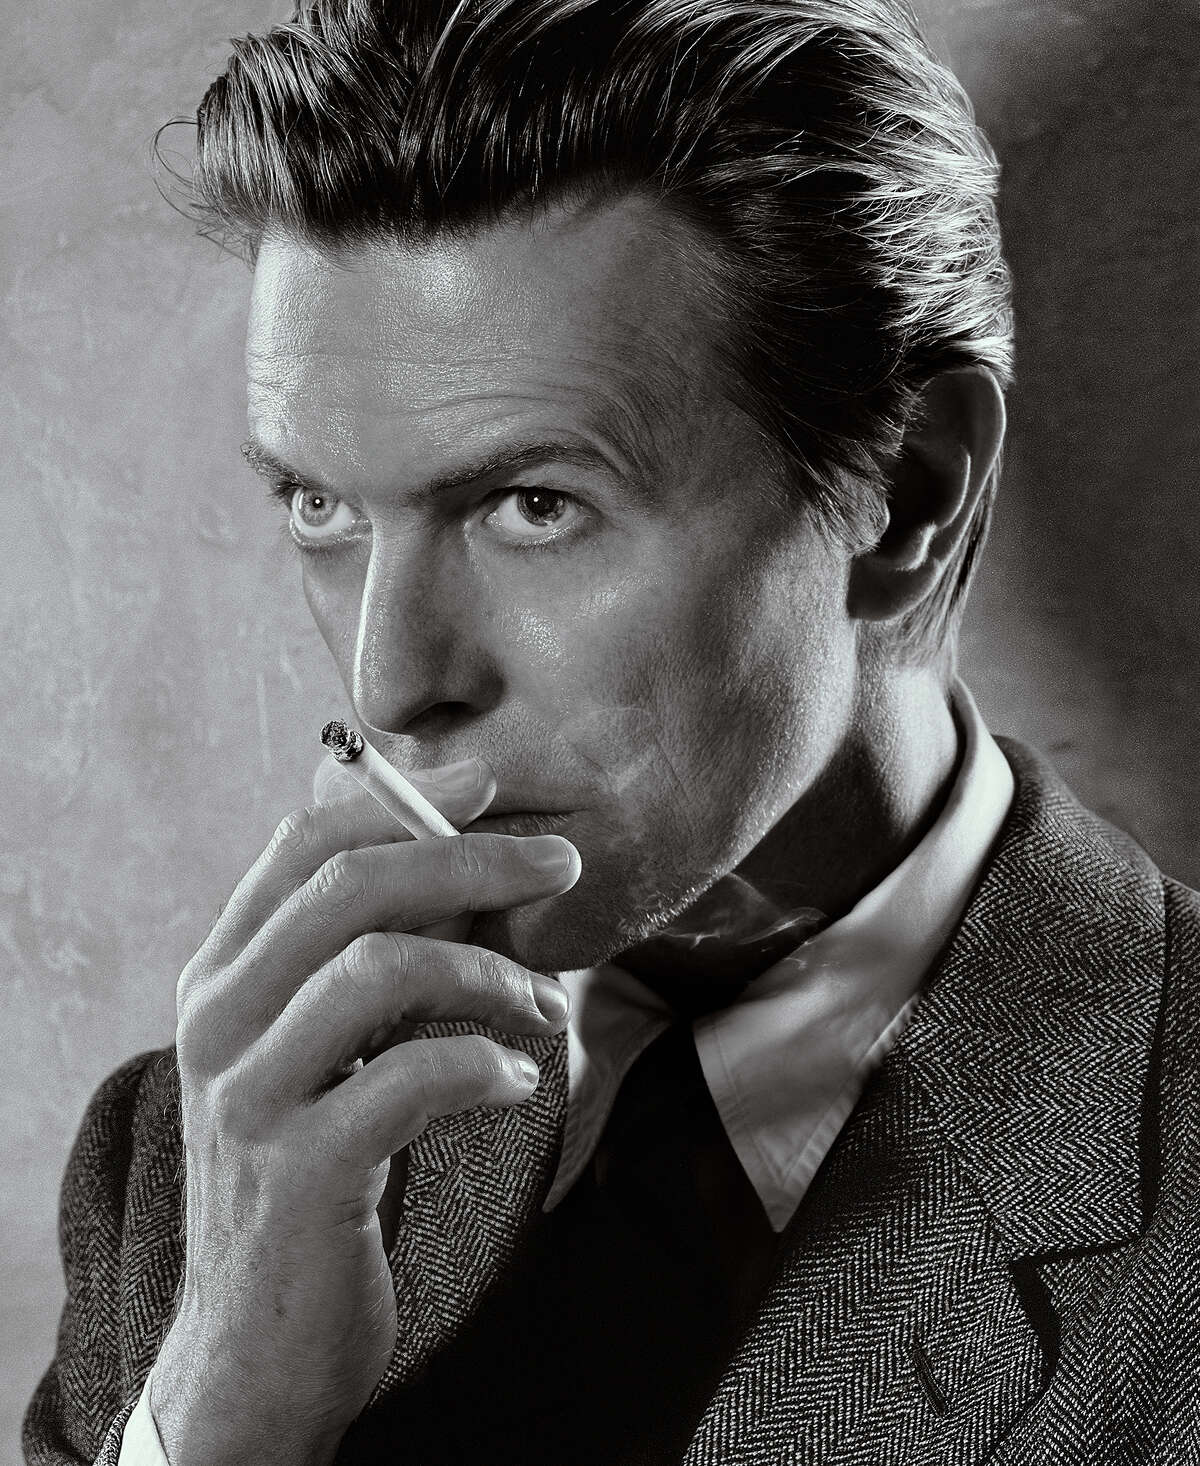 “David Bowie, Smoking, Black and White,” photographed in 2001 by Markus Klinko Printed by Weldon Color Lab on Fujicolor Chrystal Archive Digital Pearl Paper, 24x20 inches. Included in “Klinko,” a 2023 show at Nicole Longnecker Gallery in Houston, Texas, one of only two galleries in the world showing the exhibition. NOTE: ONE-TIME USE ONLY.